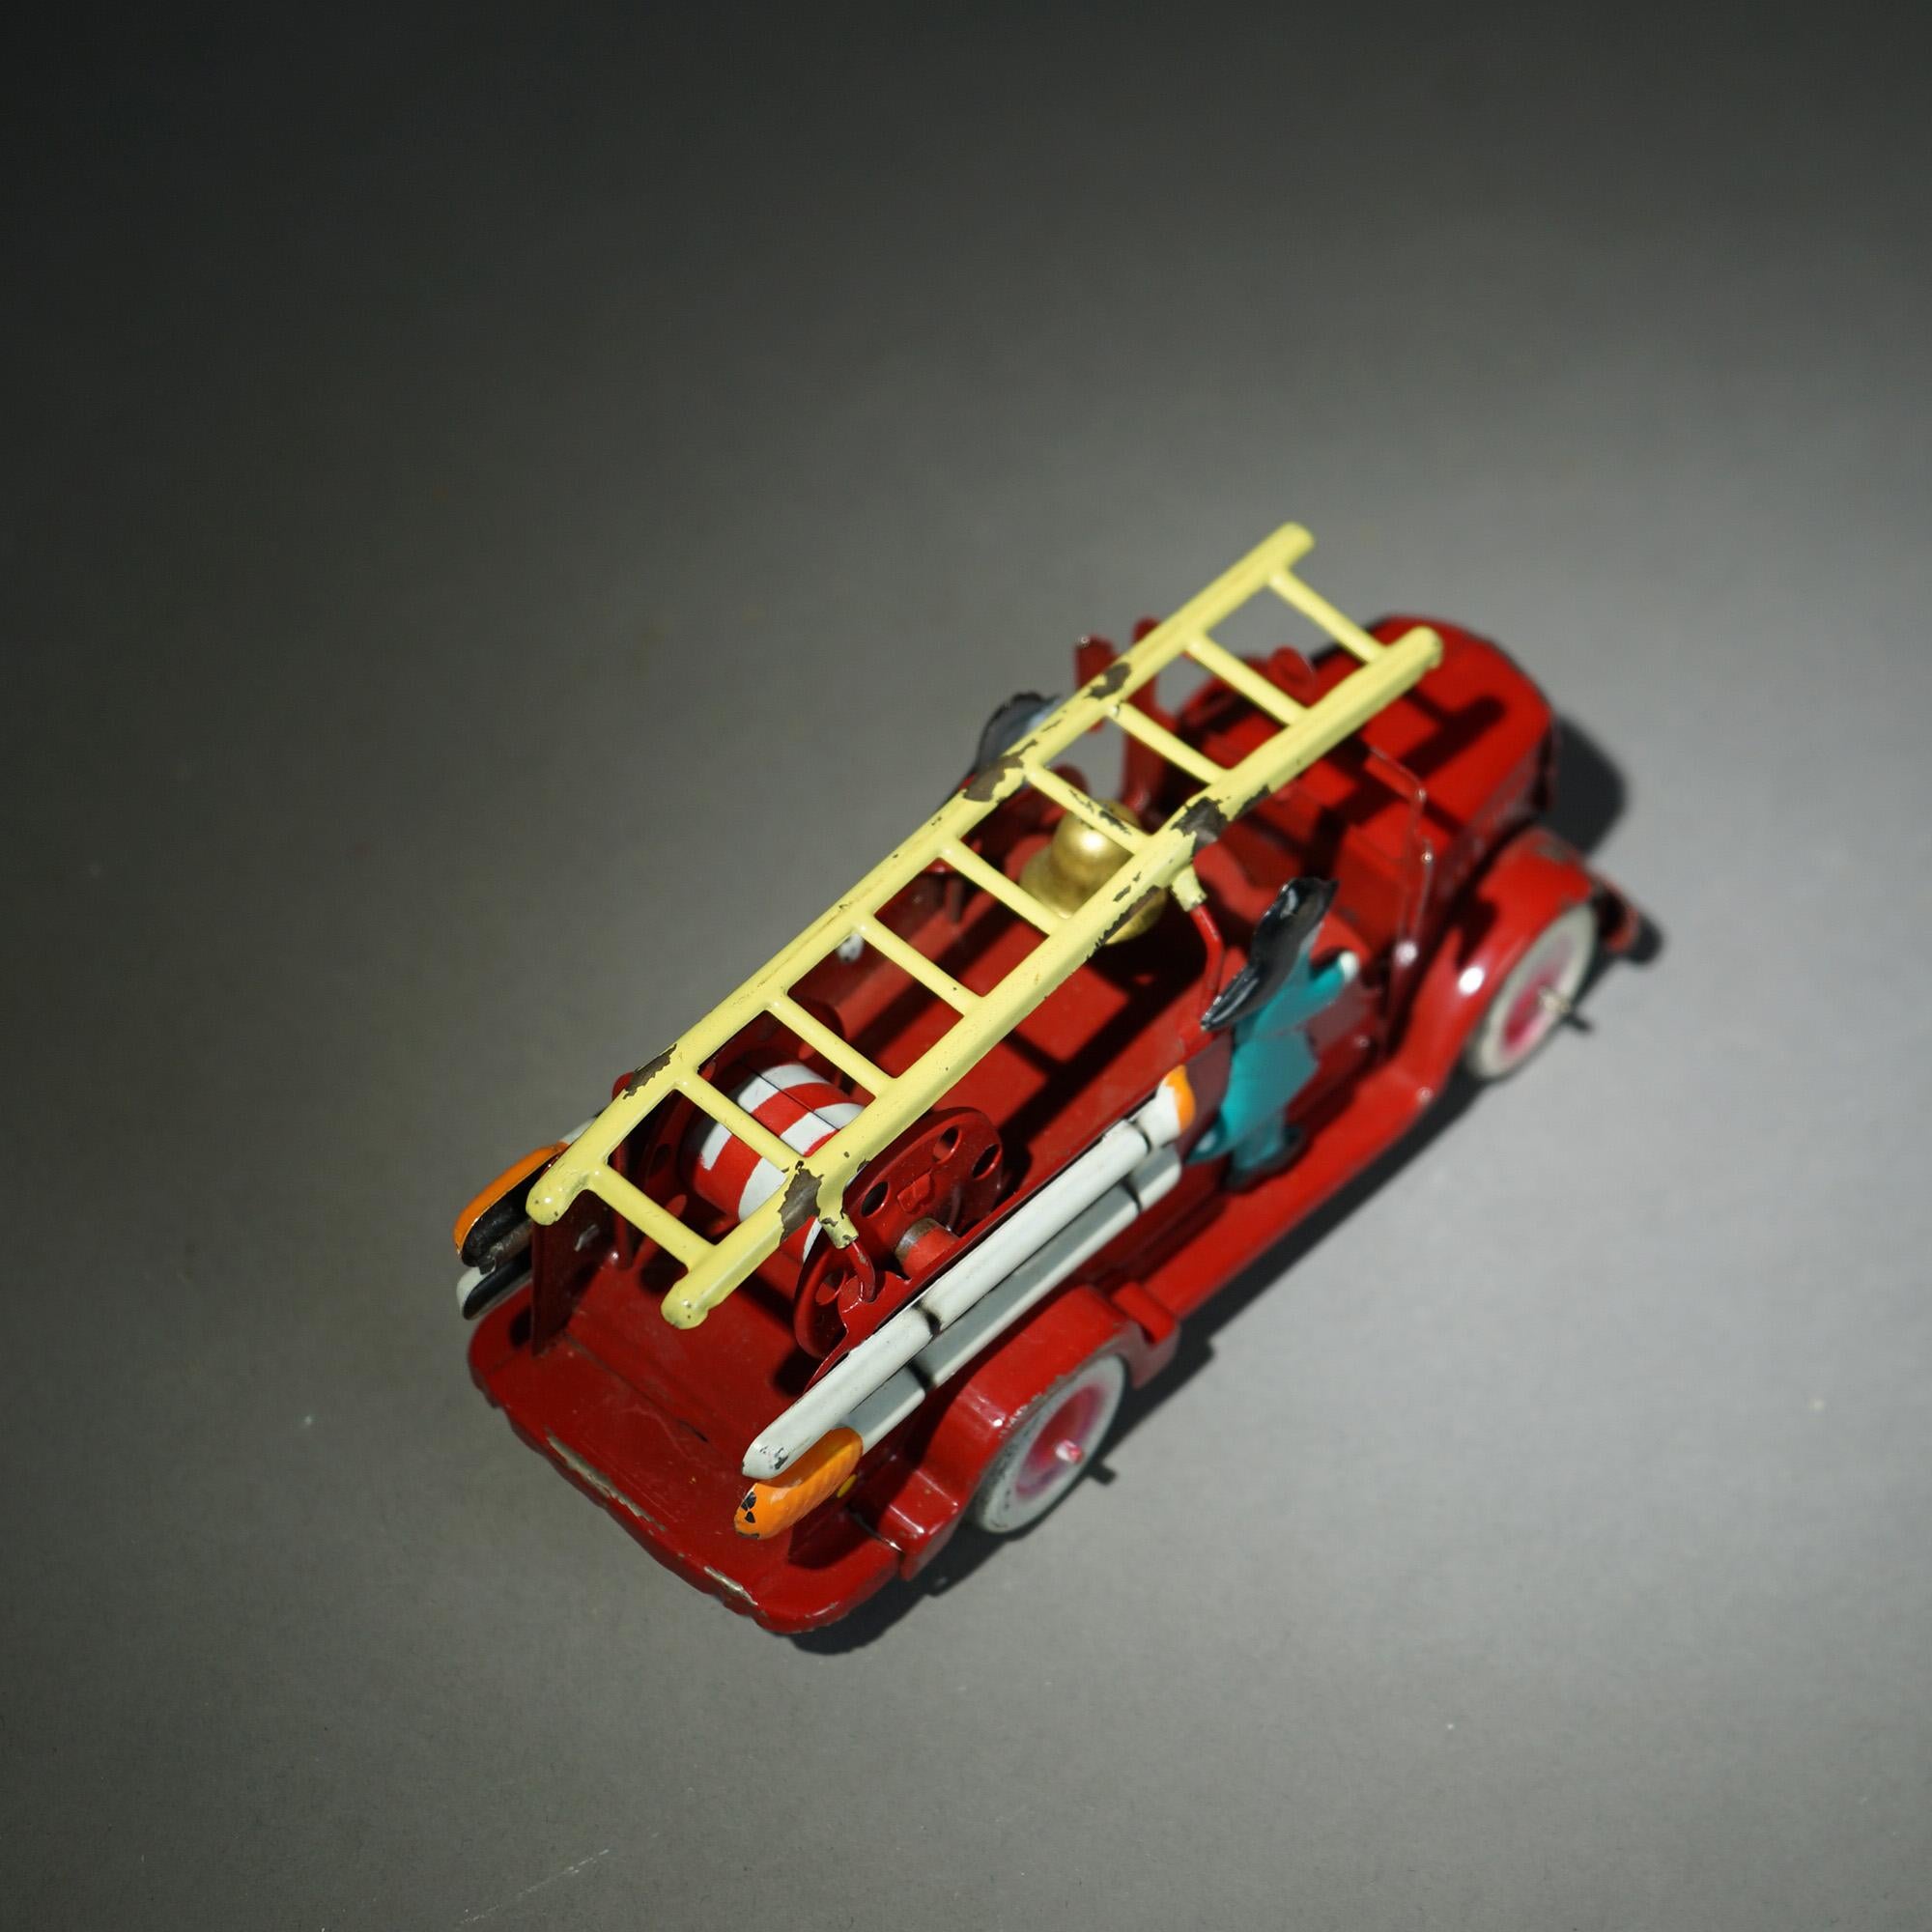 Japanese Tin Litho Toy Fire Engine In The Original Box Circa 1950 8